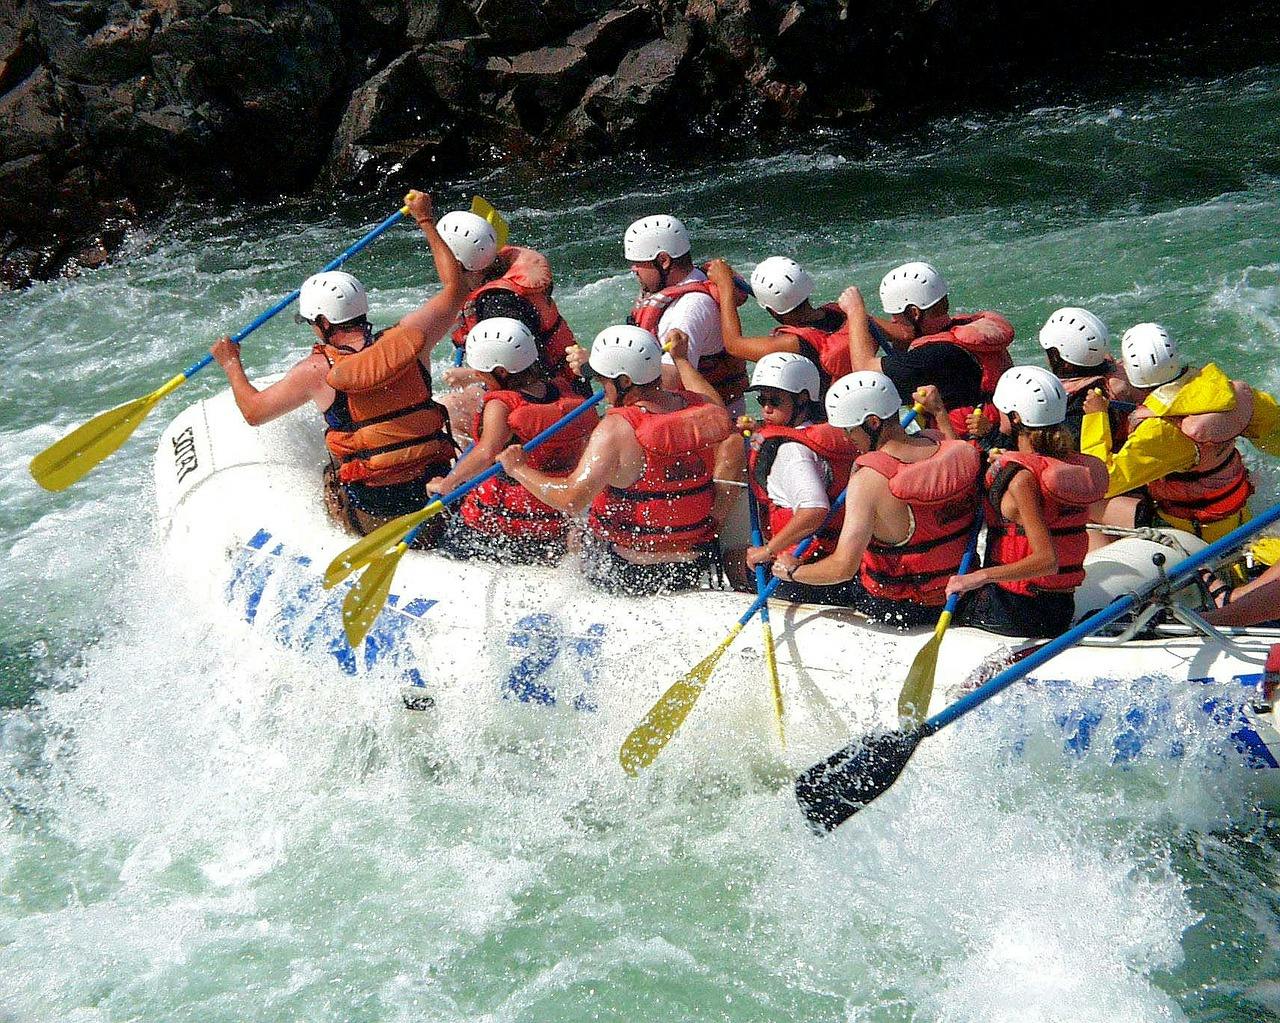 group whitewater rafting on Fraser River in British Columbia, Canada